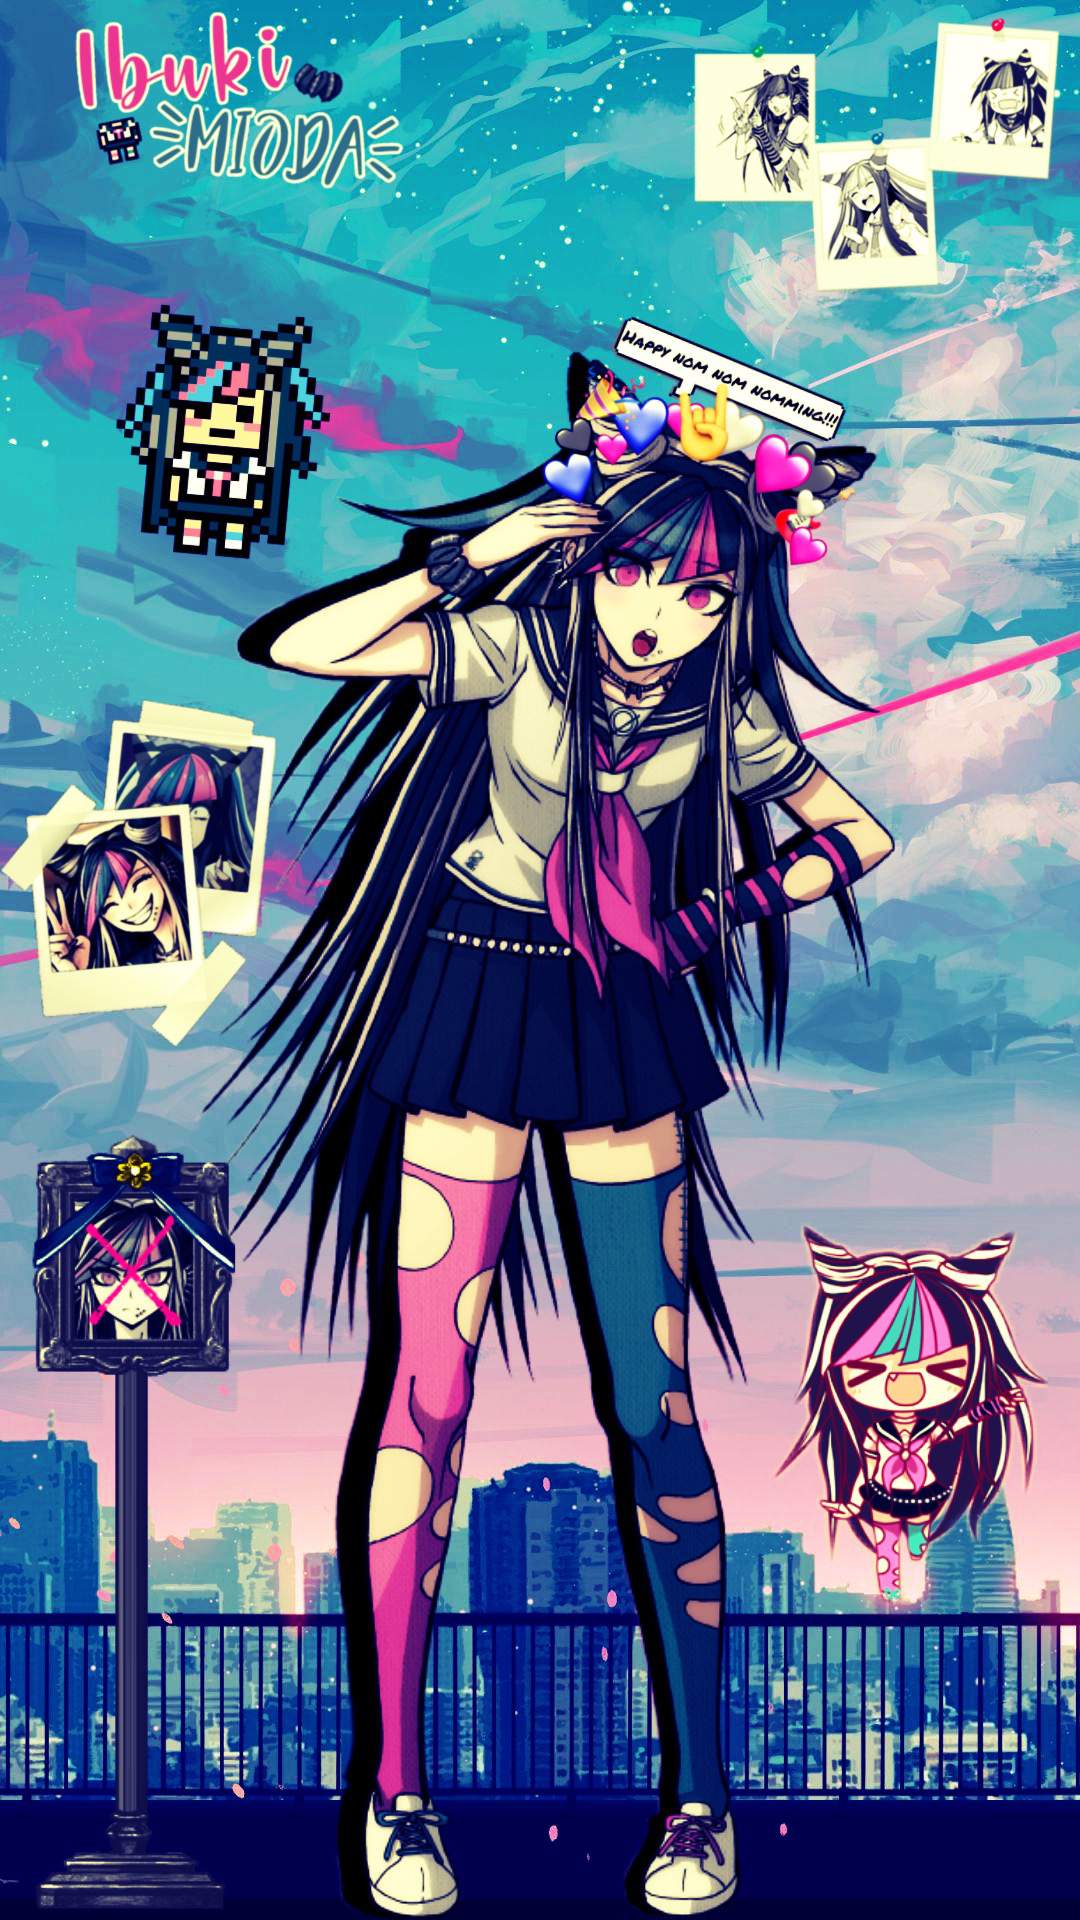 Download mioda image for free